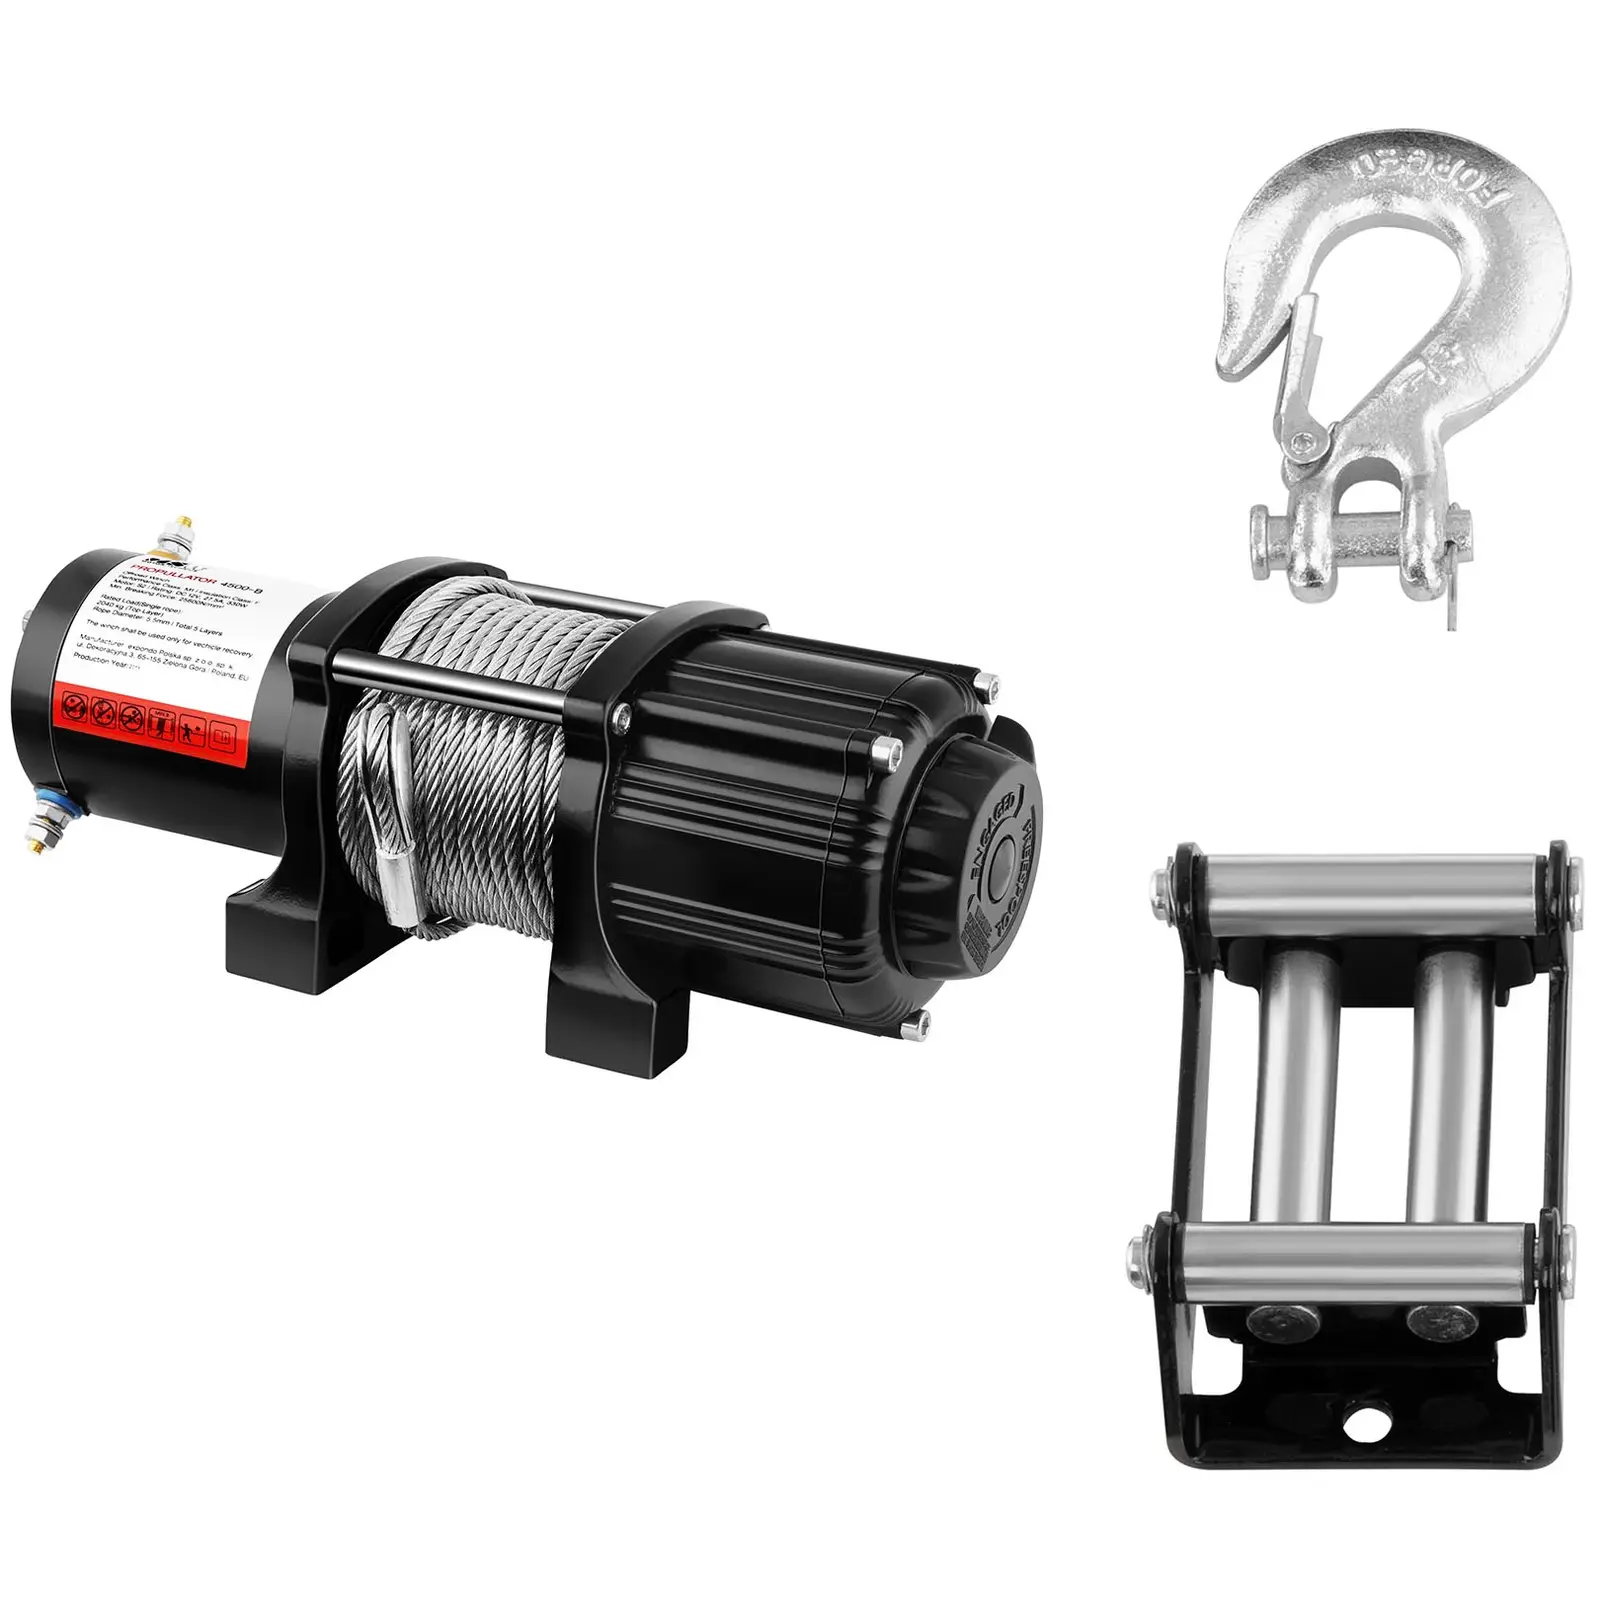 Electric Winch - 2,040 kg - 4,500 lbs